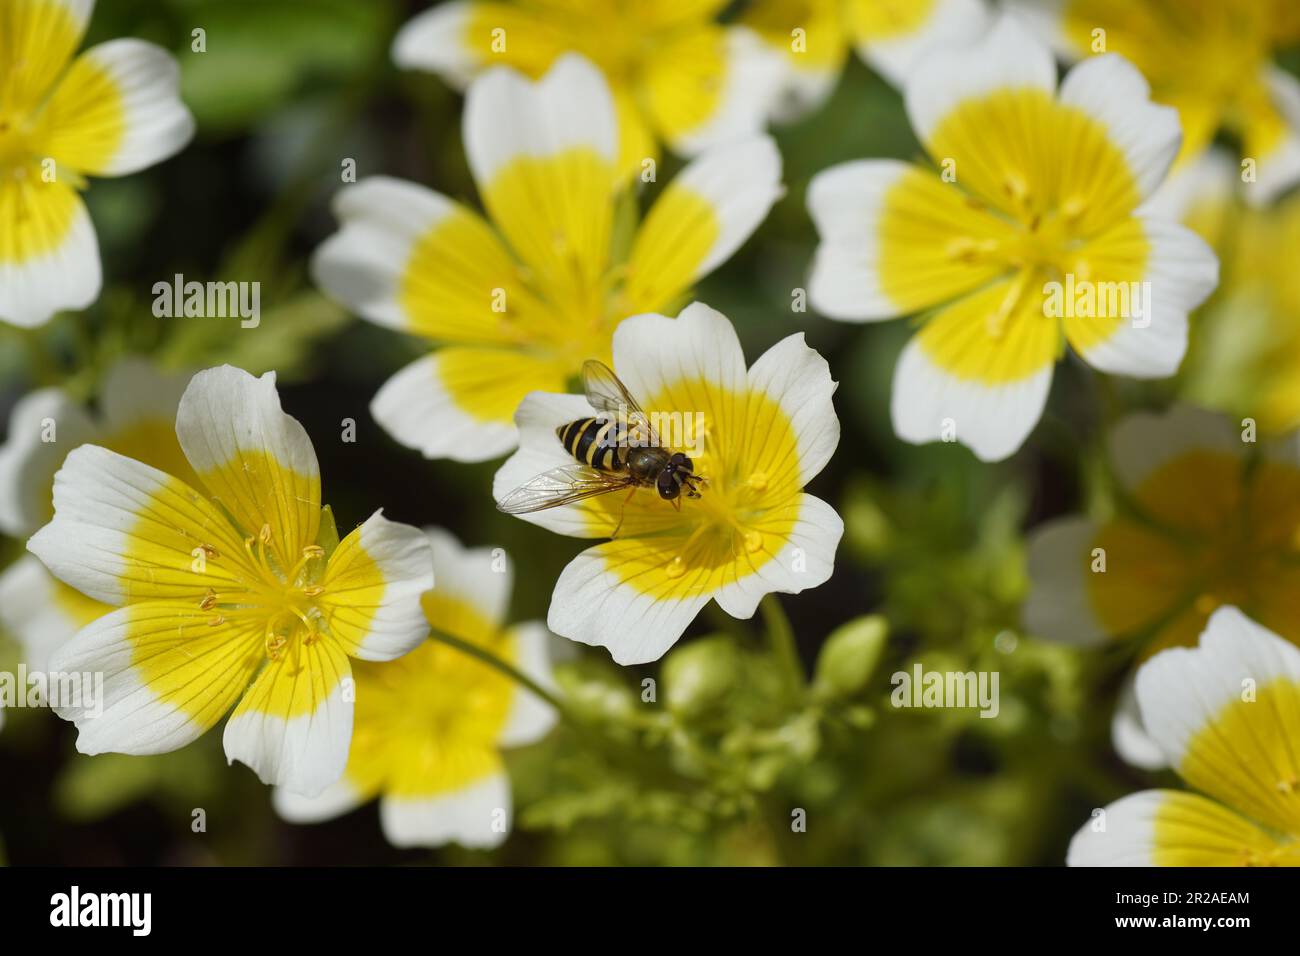 Female hoverfly Syrphus ribesii, family Syrphidae on flowers of Douglas' meadowfoam, poached egg plant (Limnanthes douglasii), family meadowfoam Stock Photo